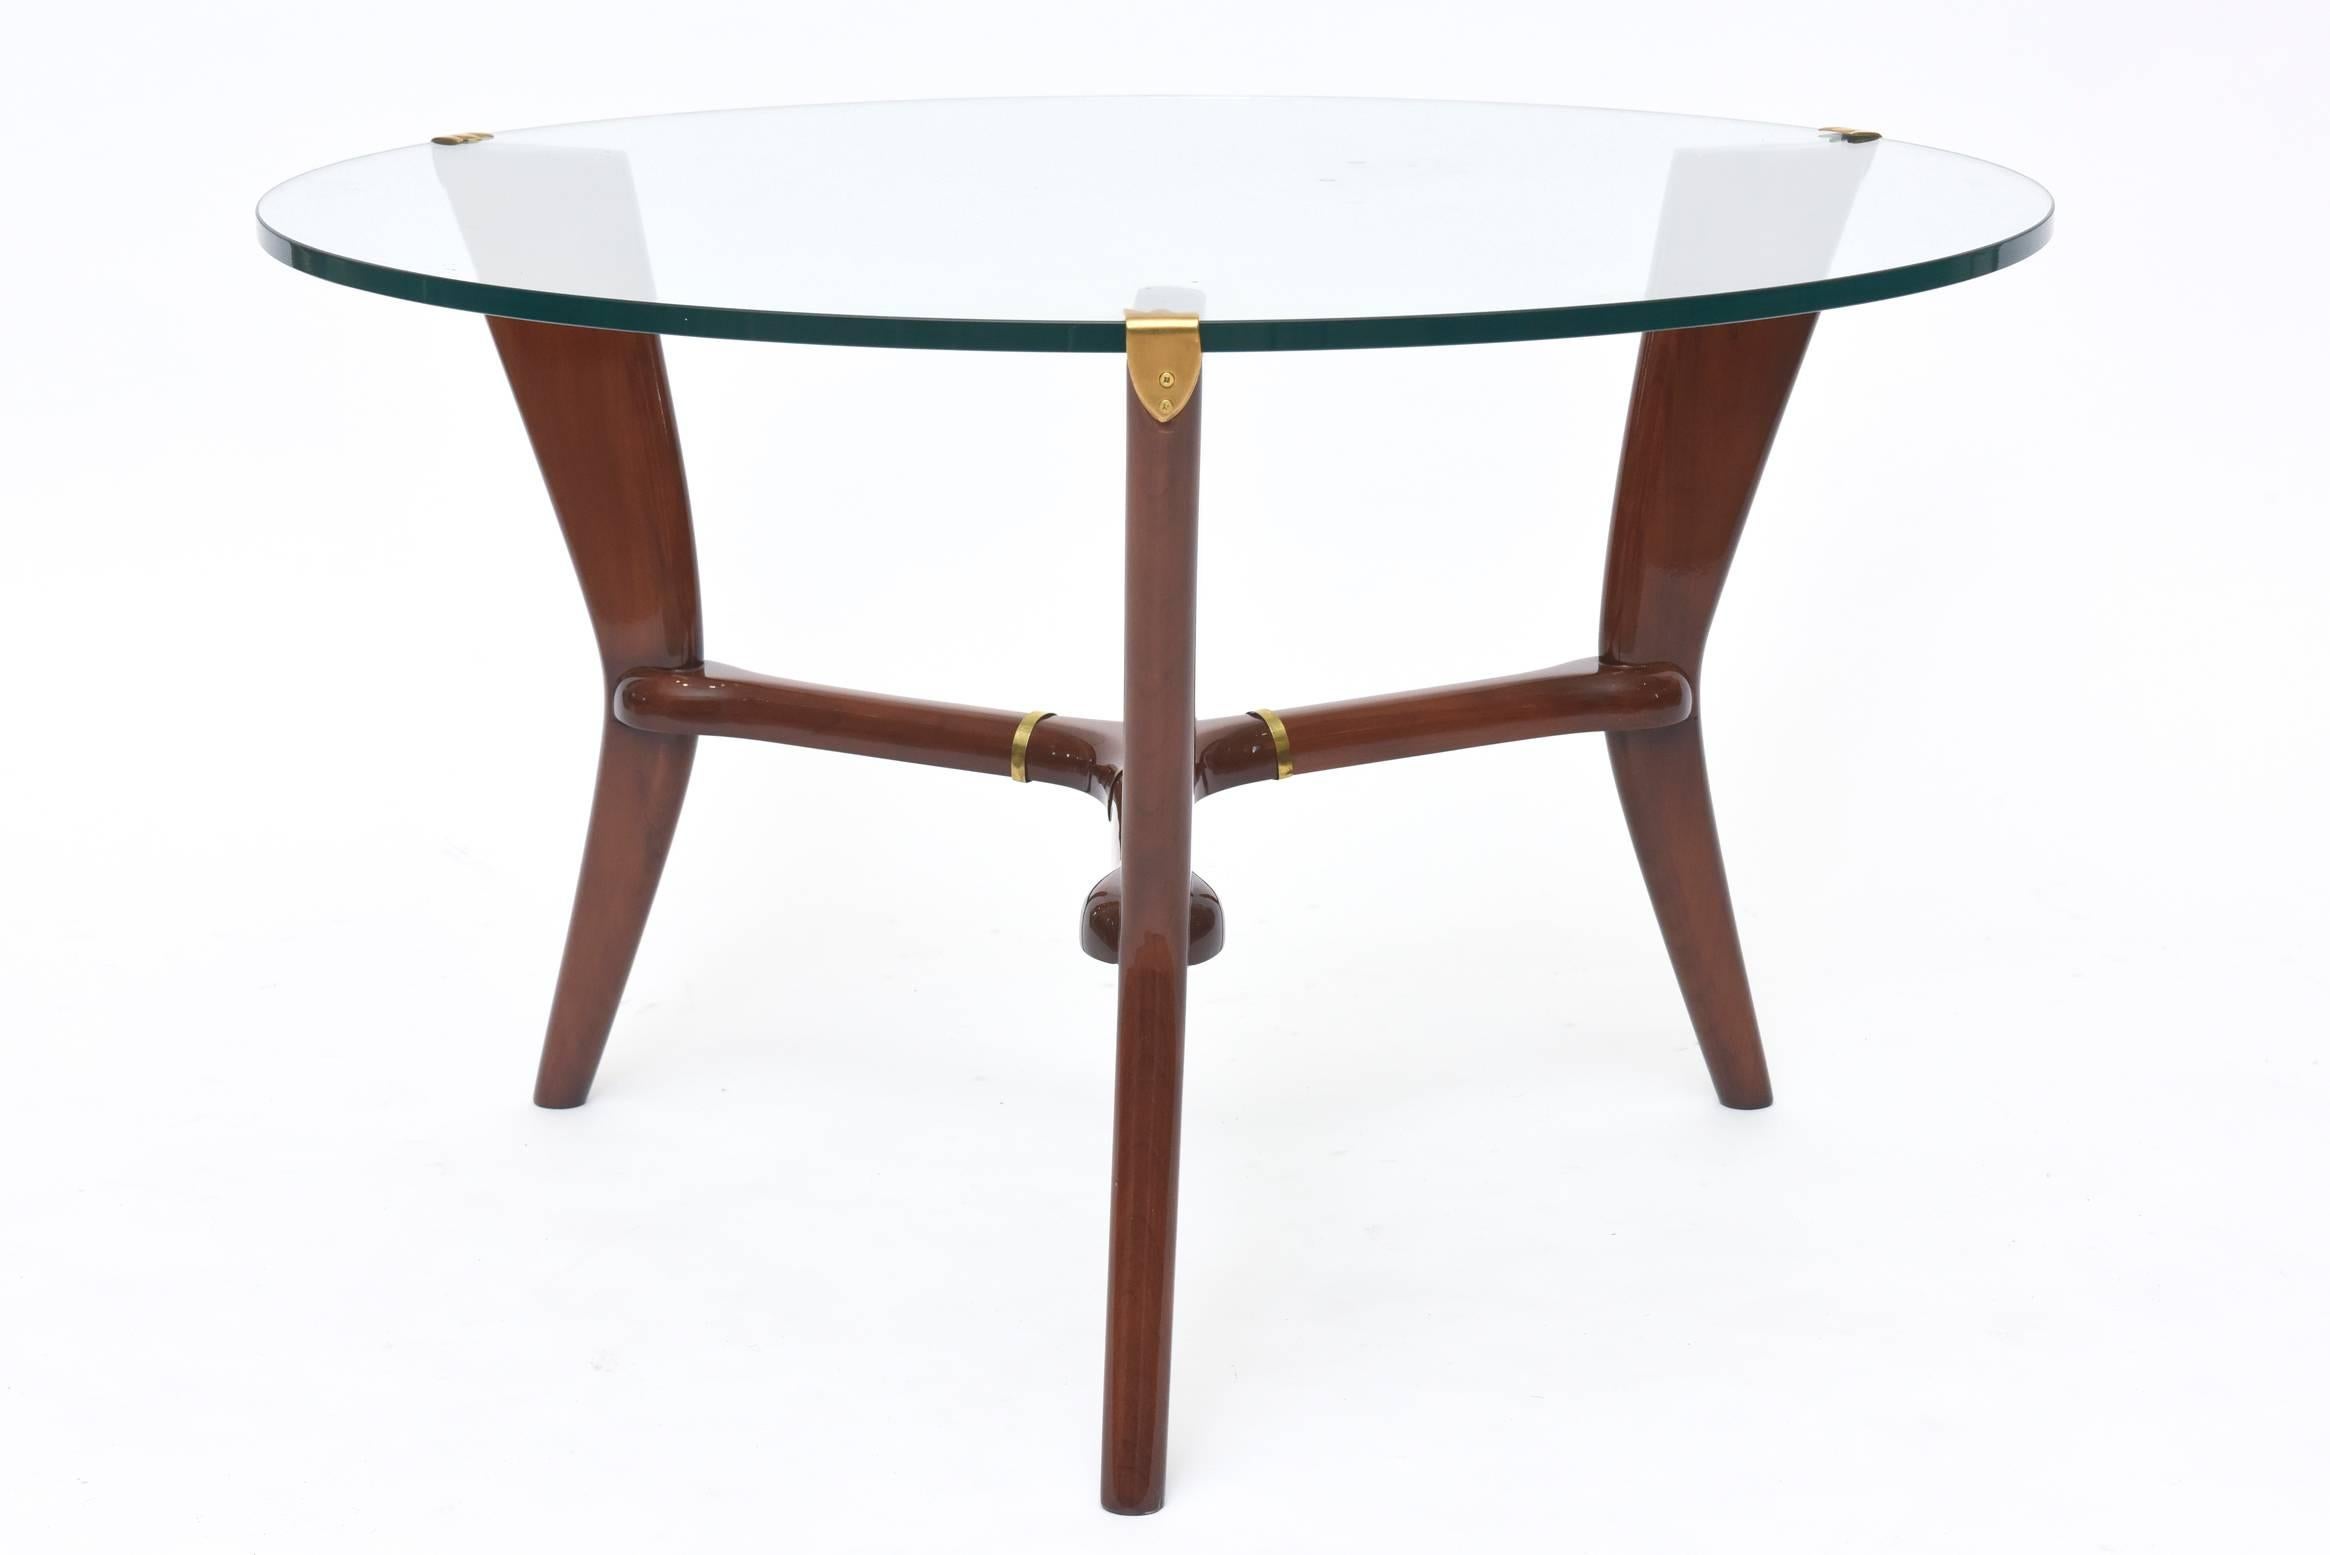 Midcentury Italian modern glass table designed by Osvaldo Borsani in a three-legged sculpted walnut pedestal base with small hints of brass hinges and a free-form round glass top.
 